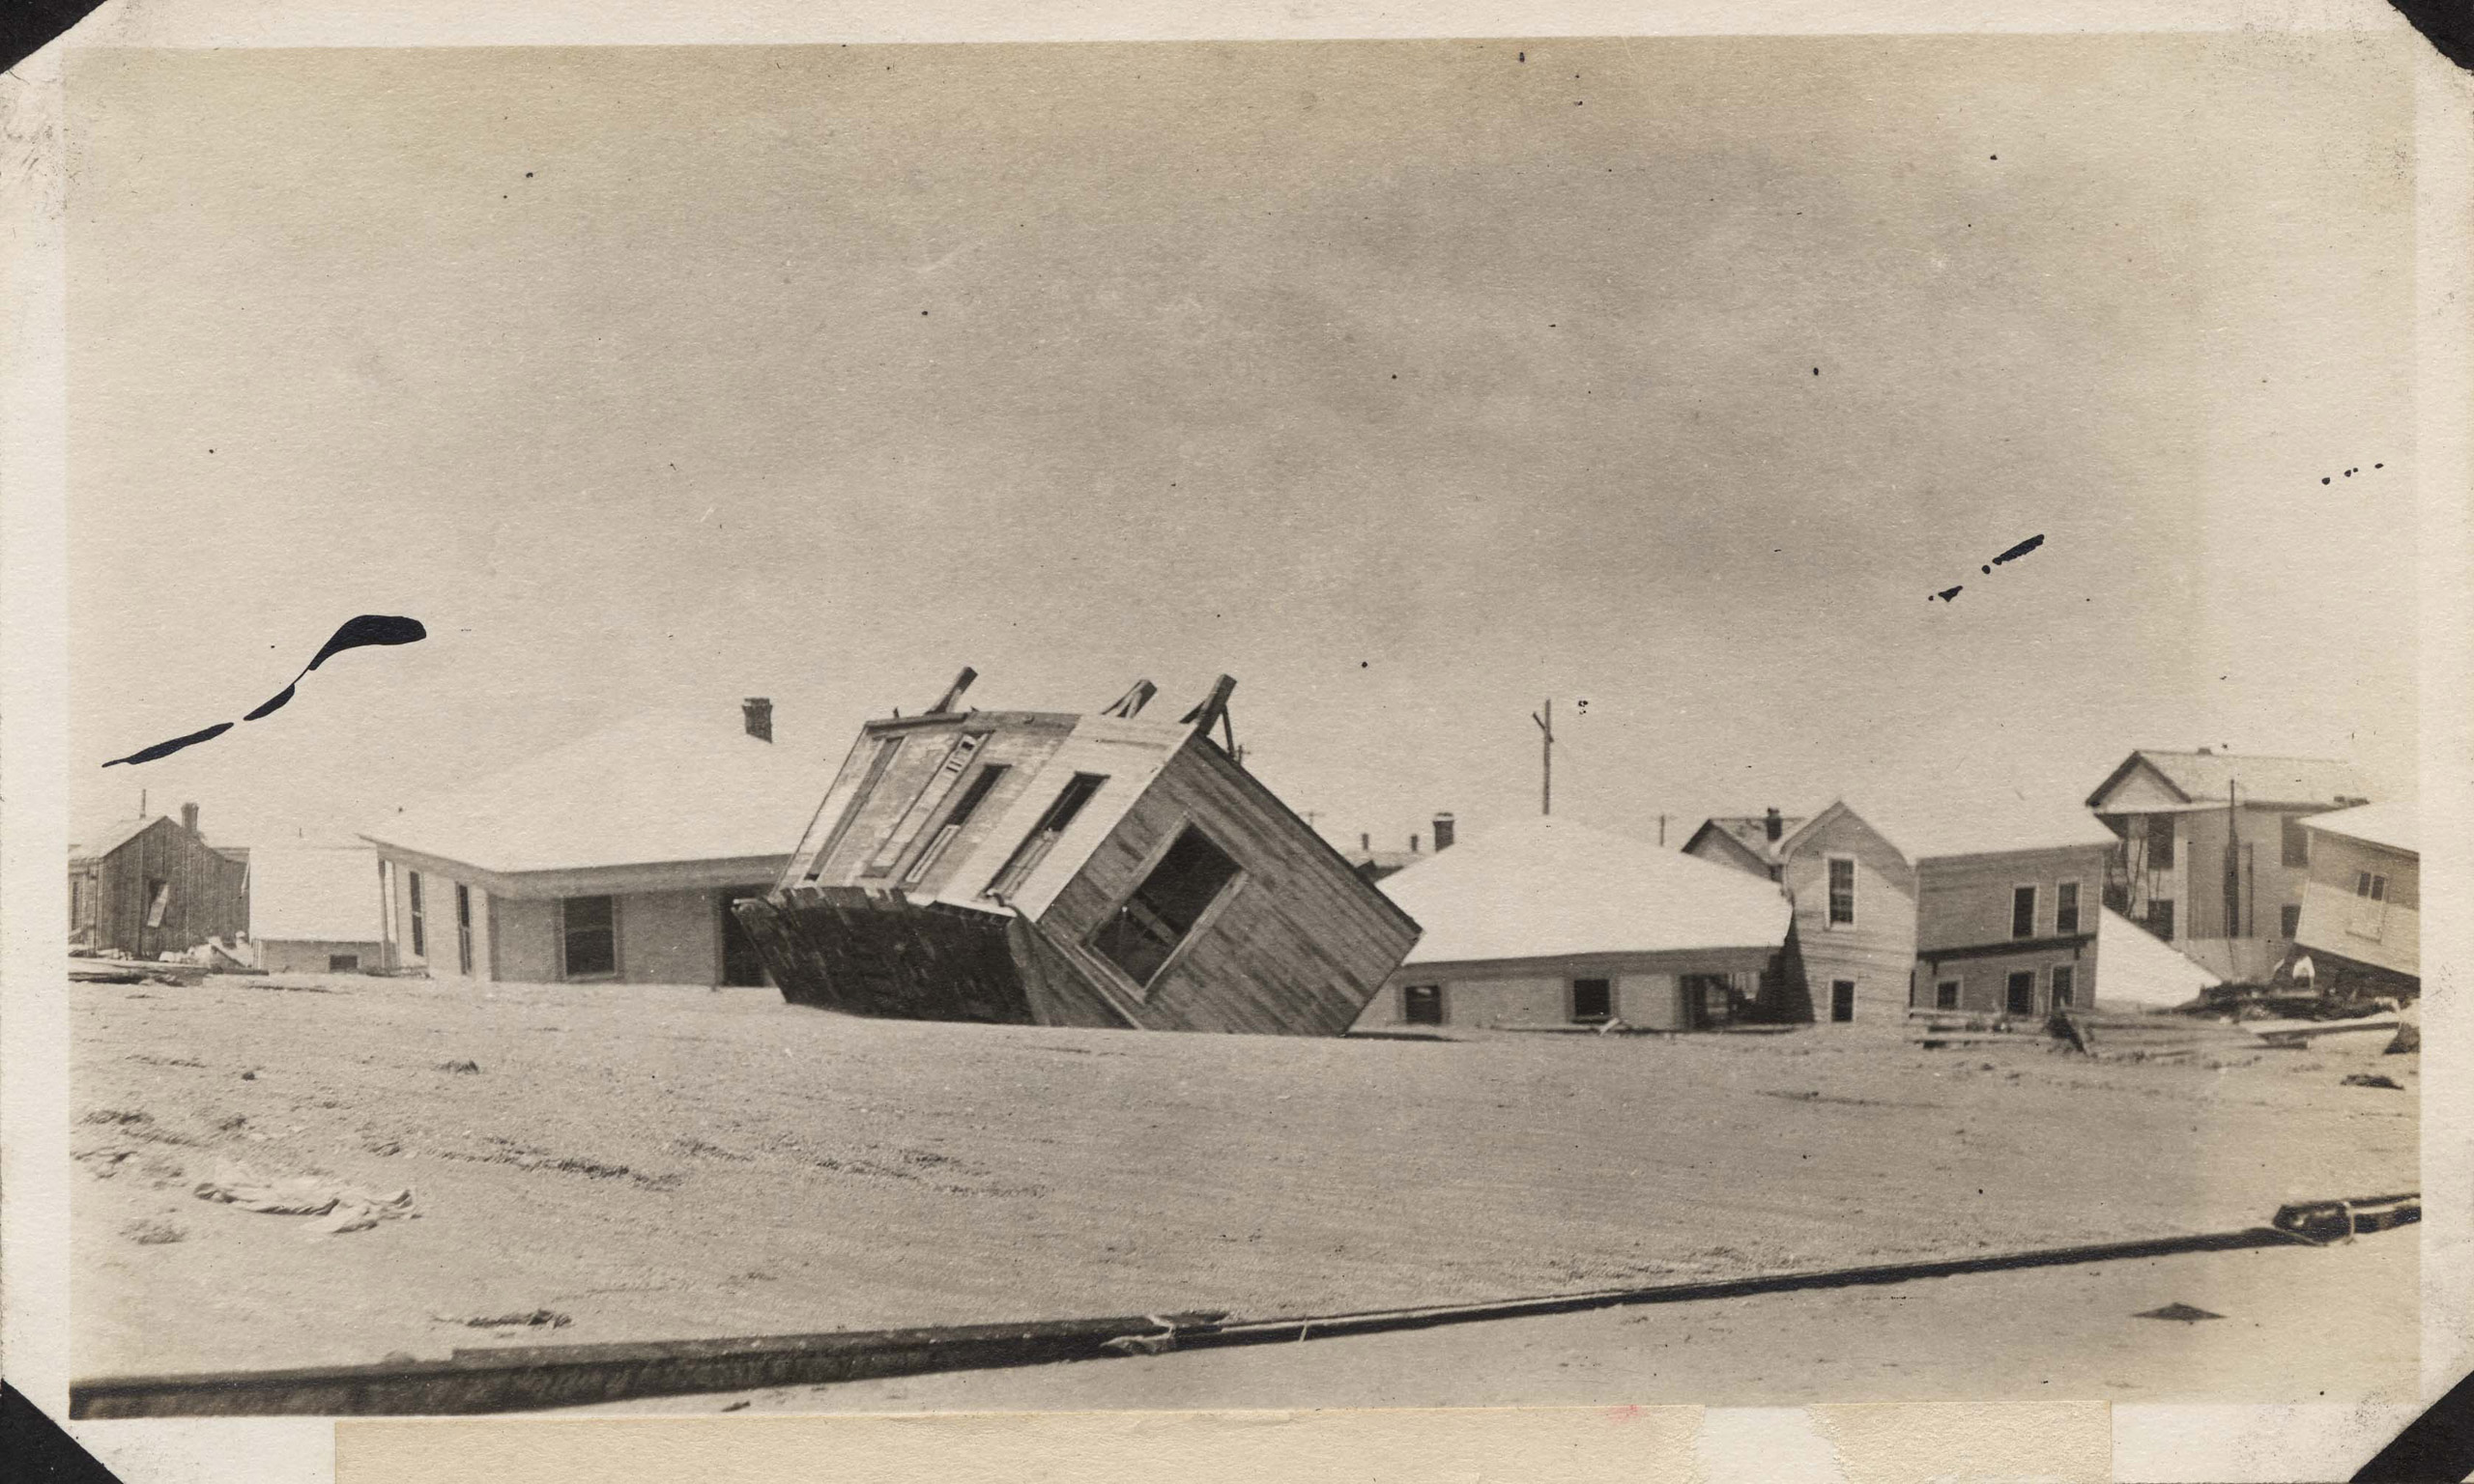 Wrecked houses submerged in sand on the east end of Galveston on Seawall Boulevard. One house has been turned upside down by the hurricane.